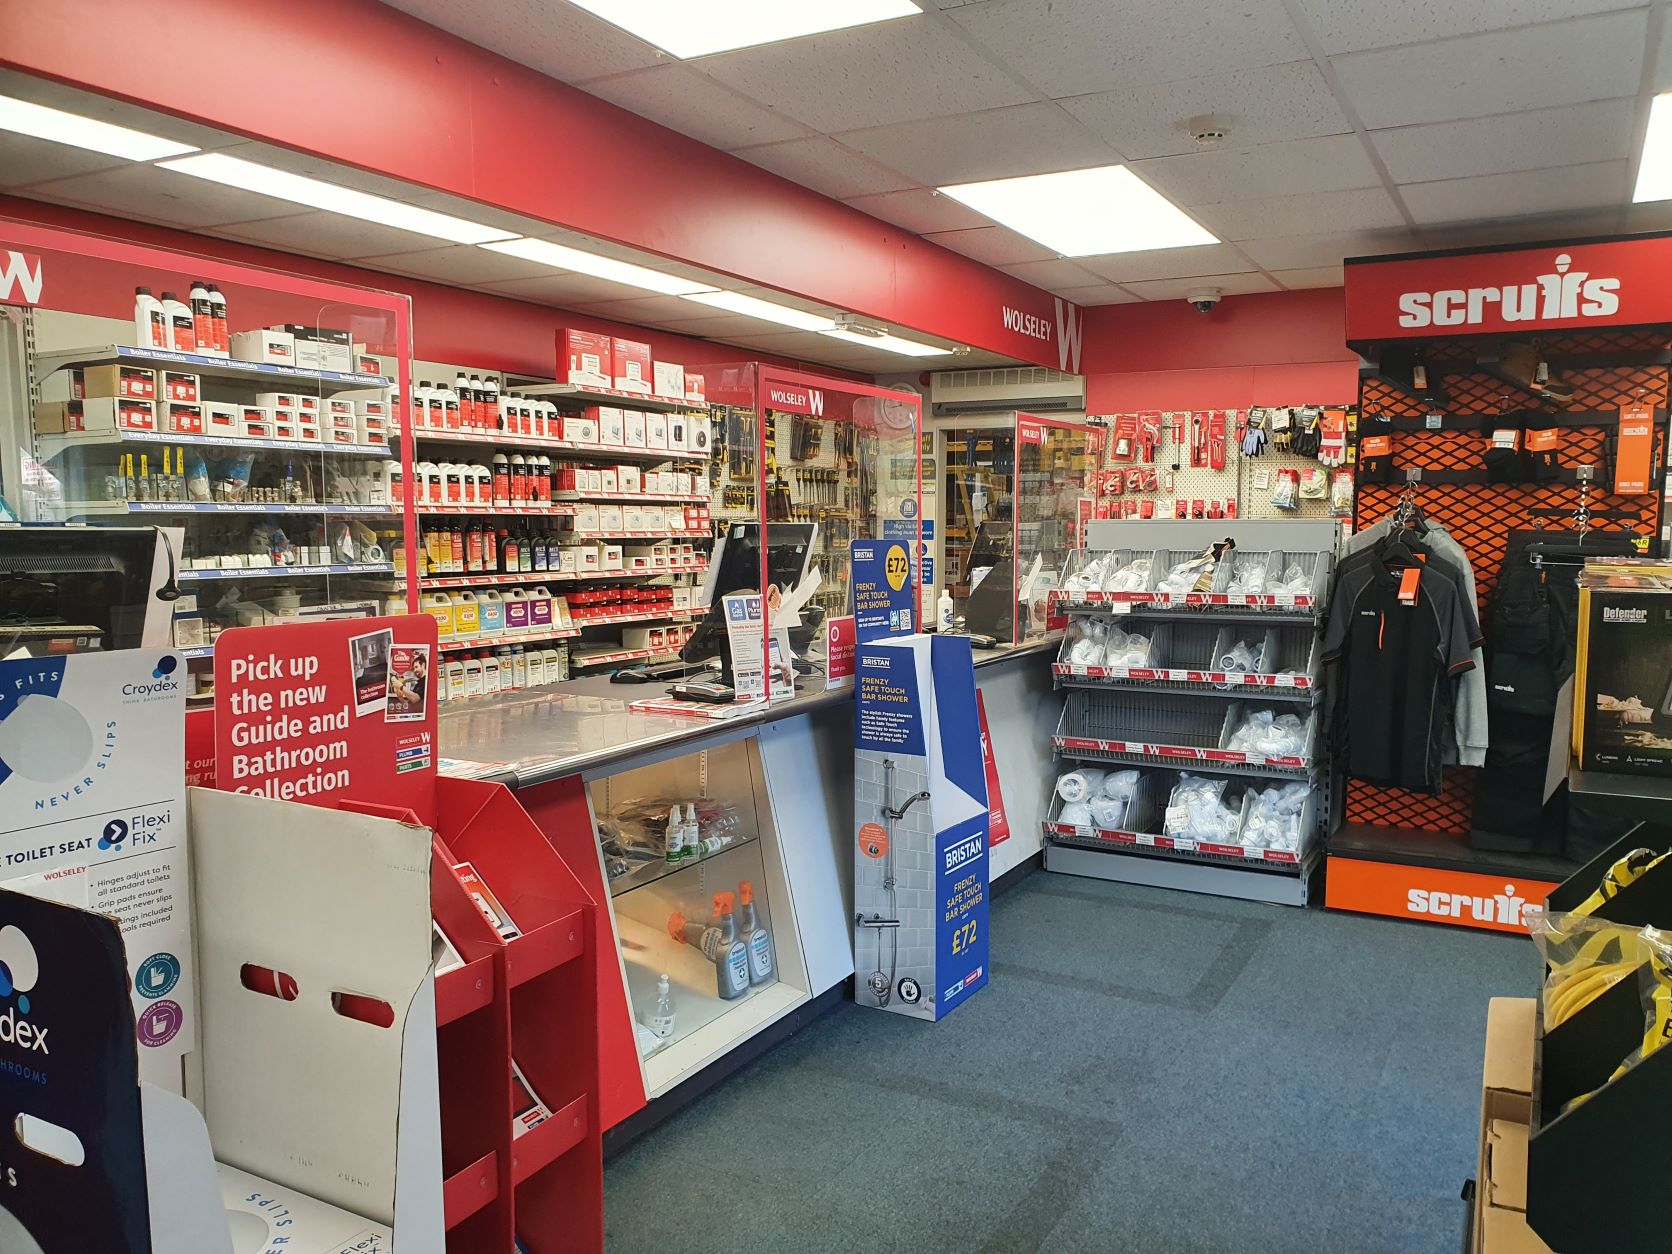 Image of the store